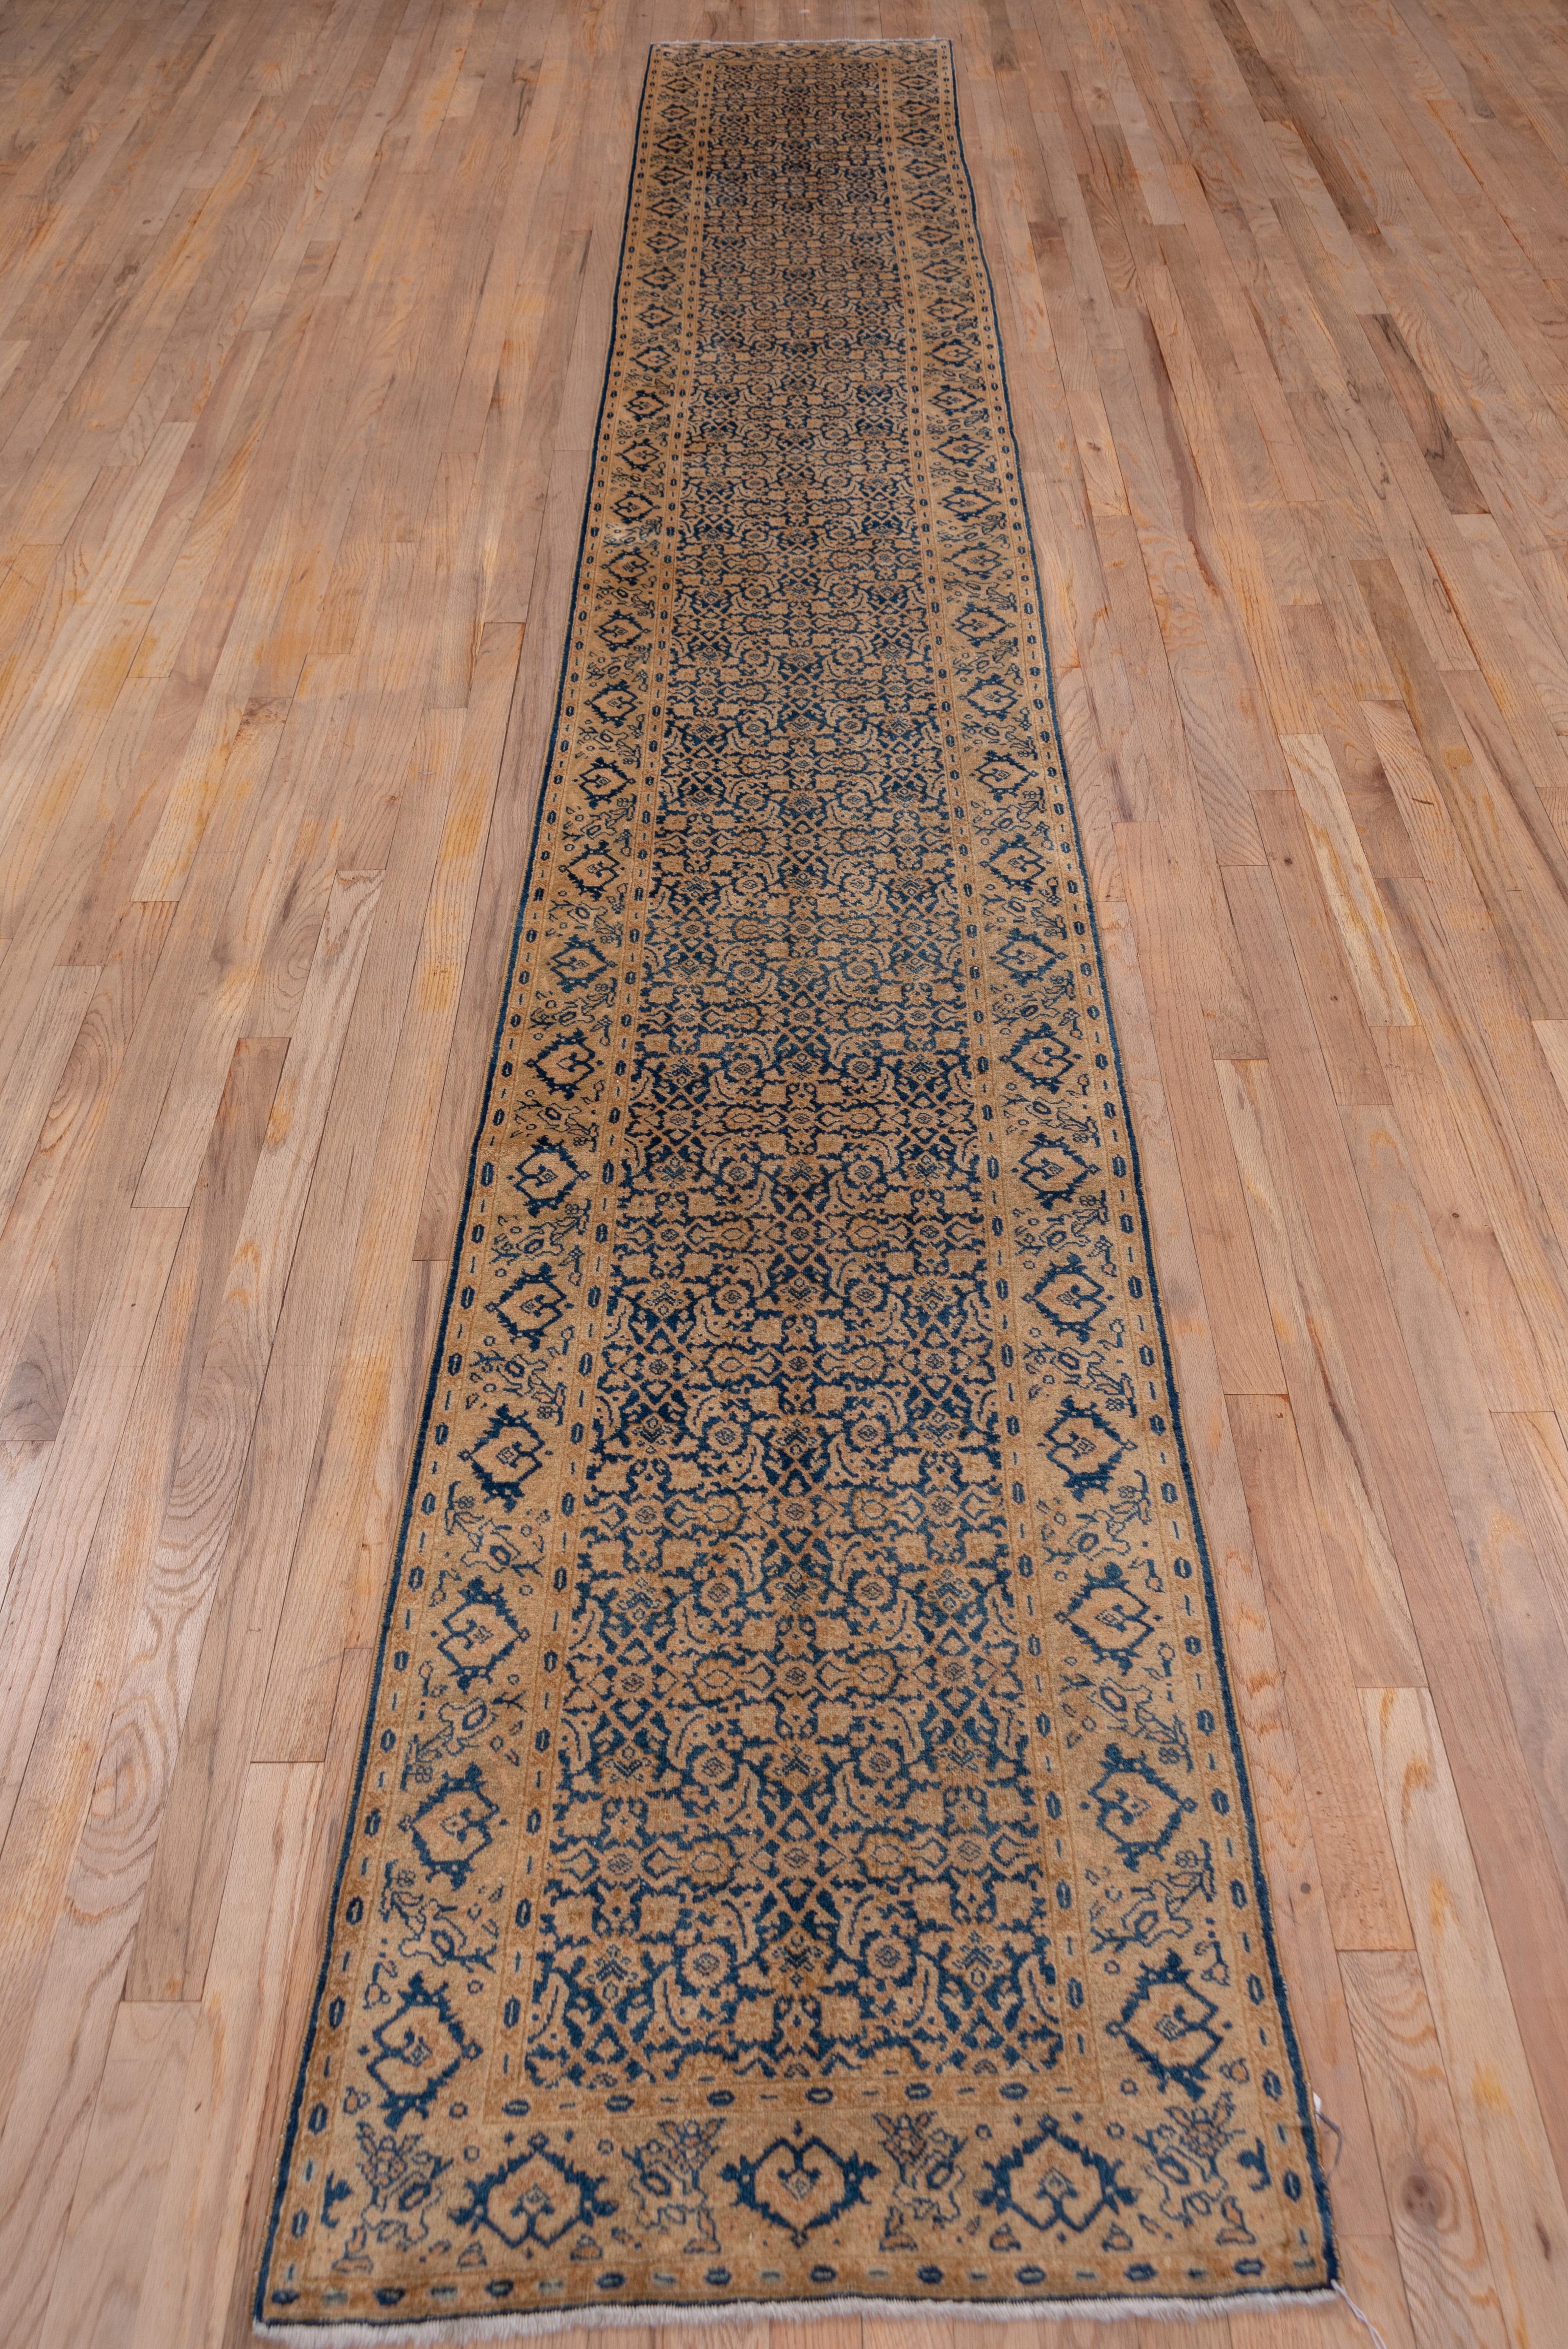 Hand-Knotted Long and Narrow Antique Persian Tabriz Runner, Blue and Gold Tones, circa 1920s For Sale